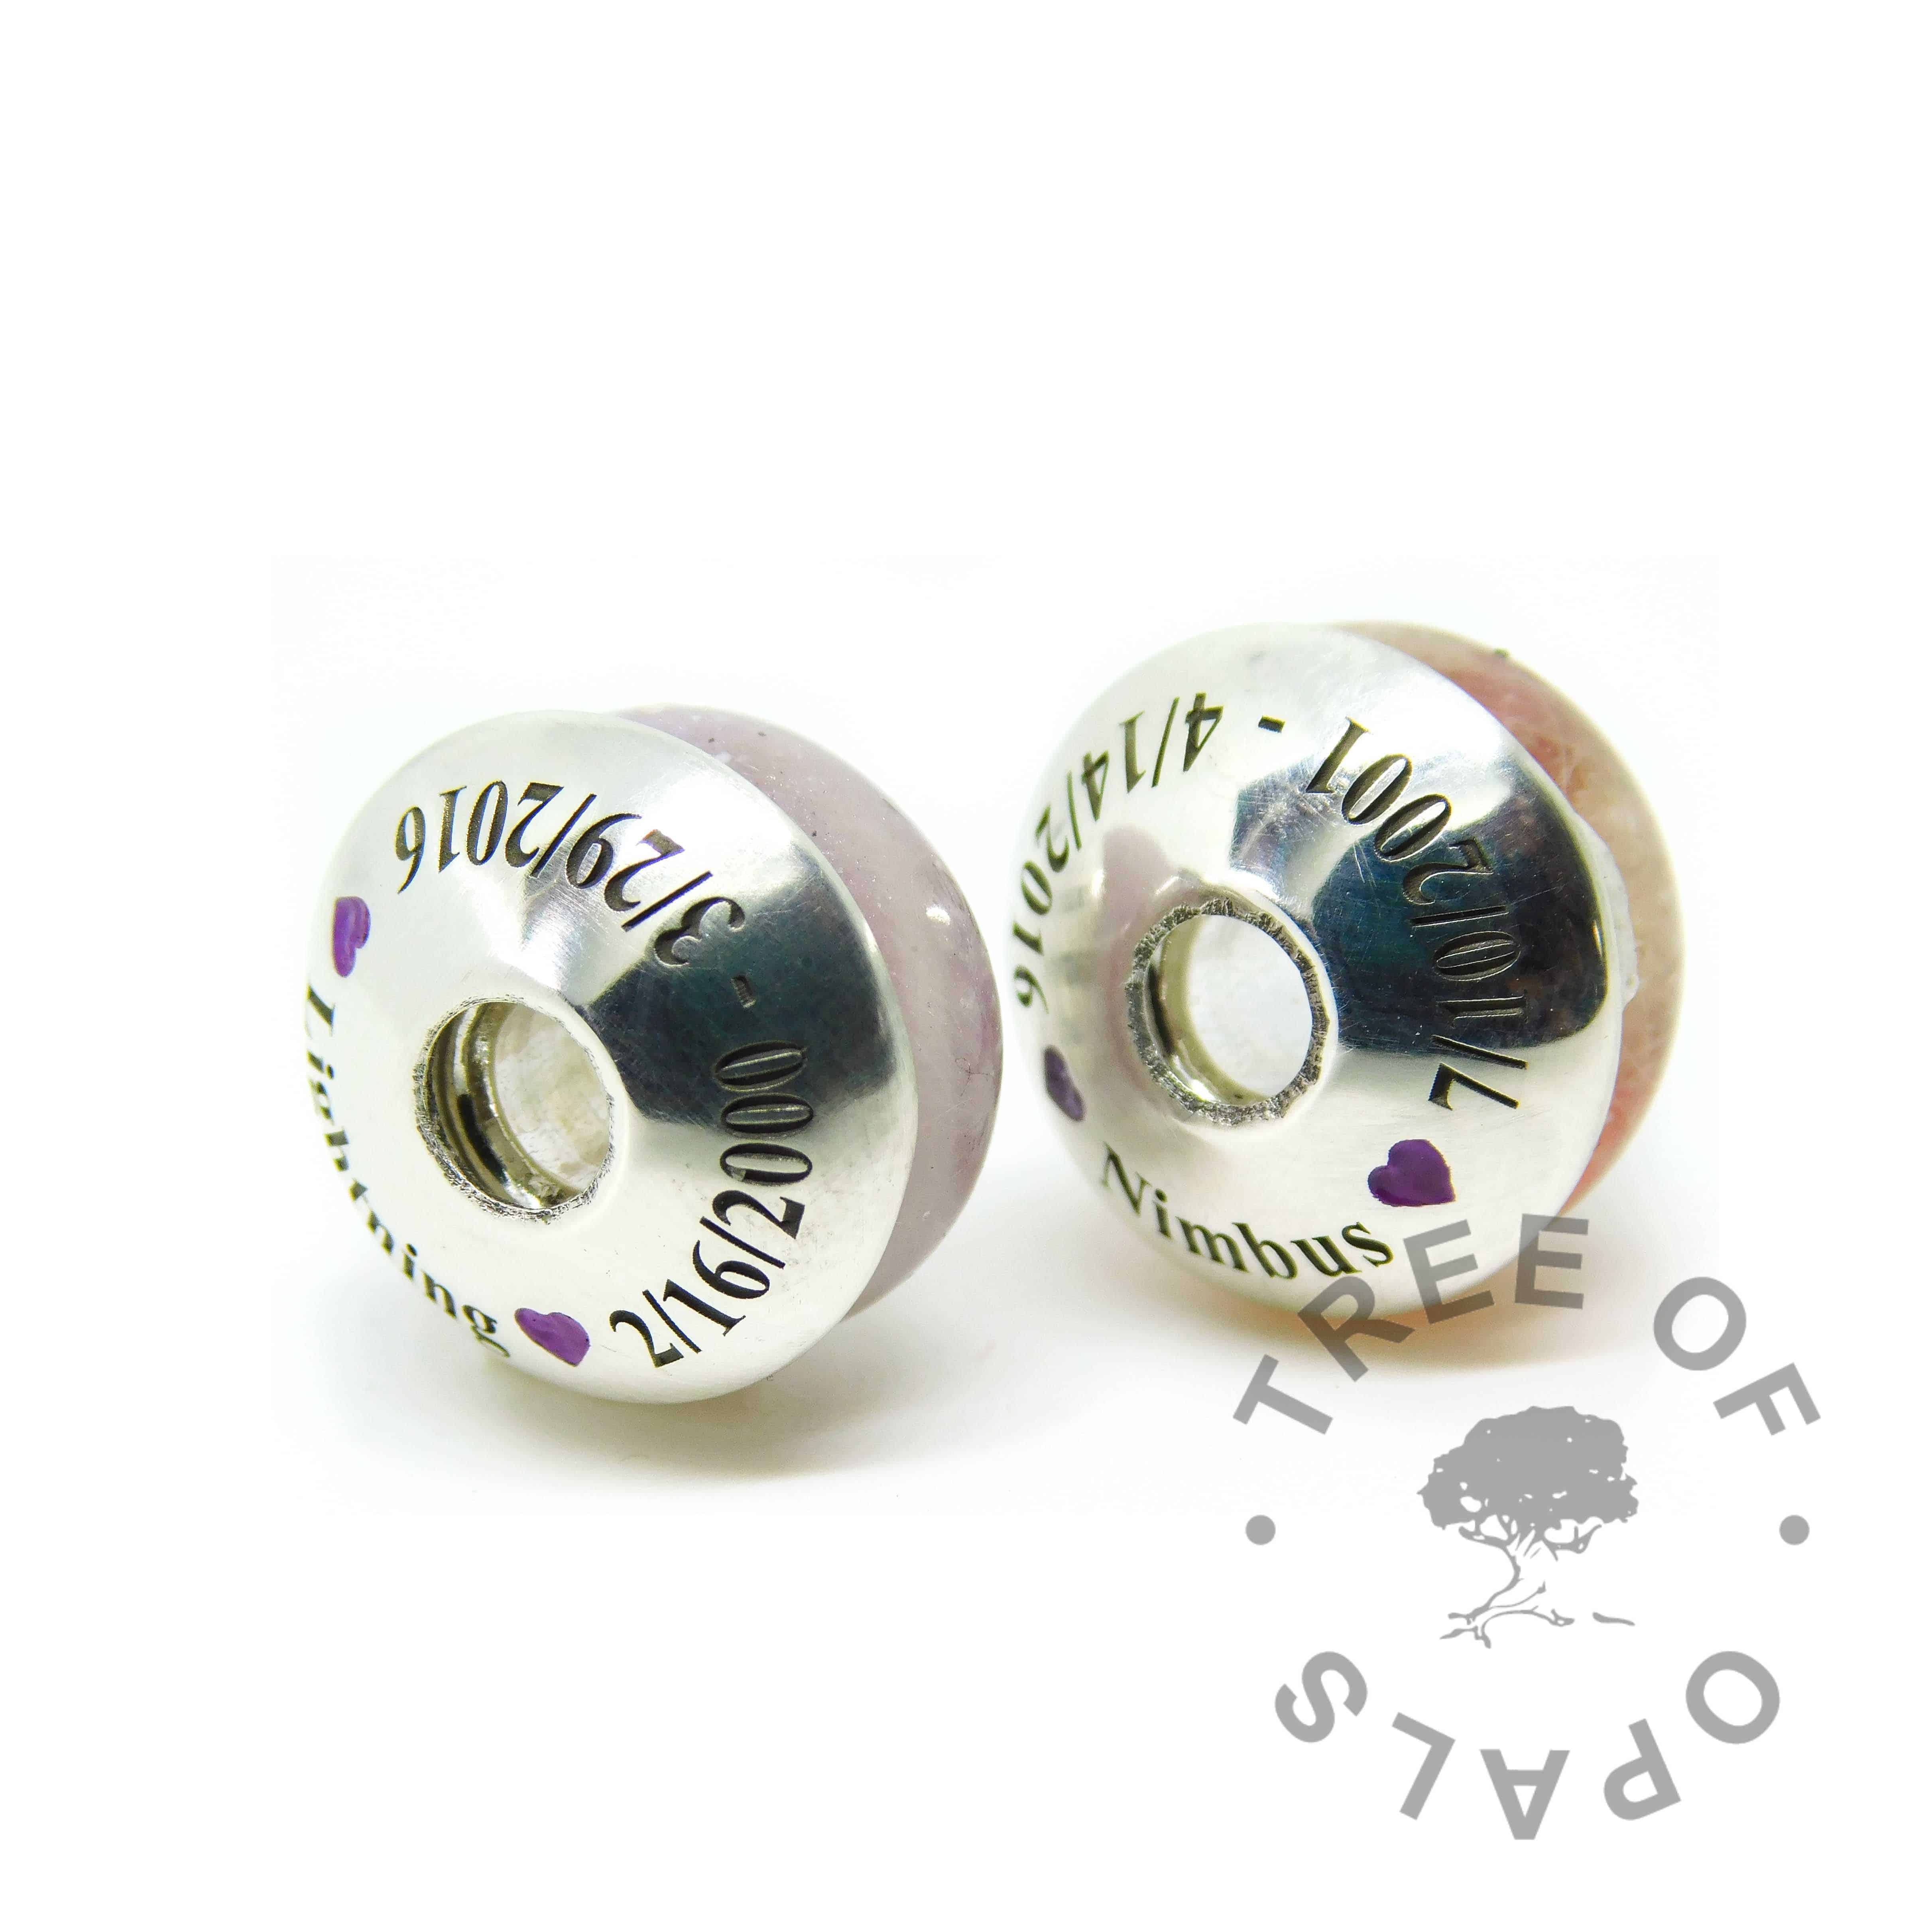 fur ash charm duo with engraved charm washers in Times New Roman font, two dates, names and hearts with purple cold enamel in the hearts. Handmade shapes. Watermarked copyright image by Tree of Opals